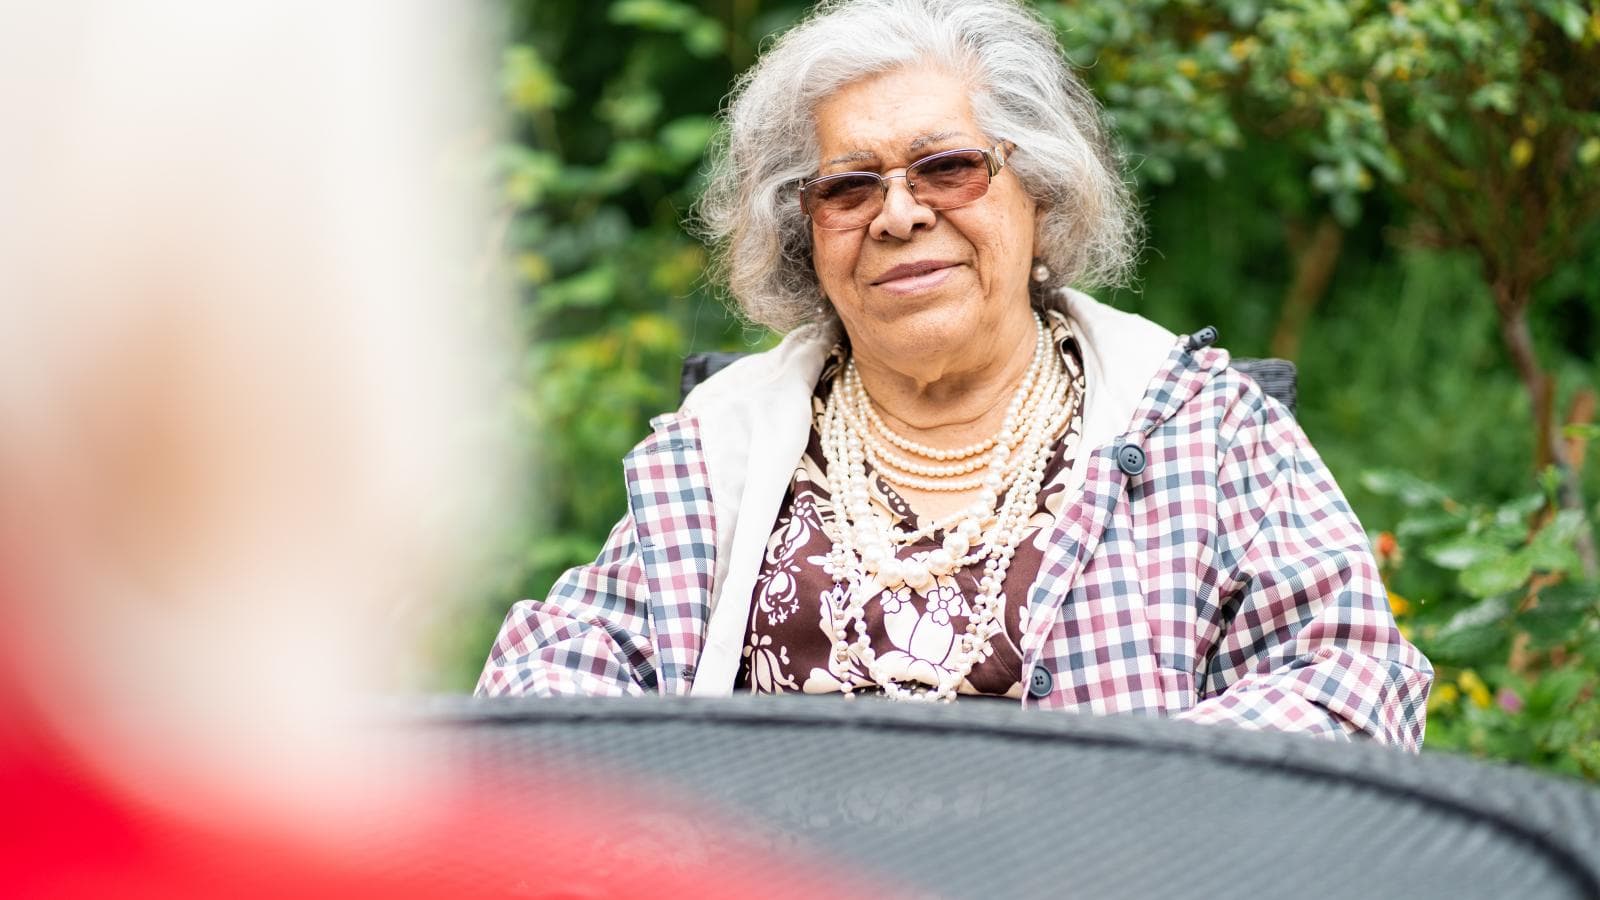 Older lady wearing glasses and a coat sat outside at a table smiling at someone who is out of focus